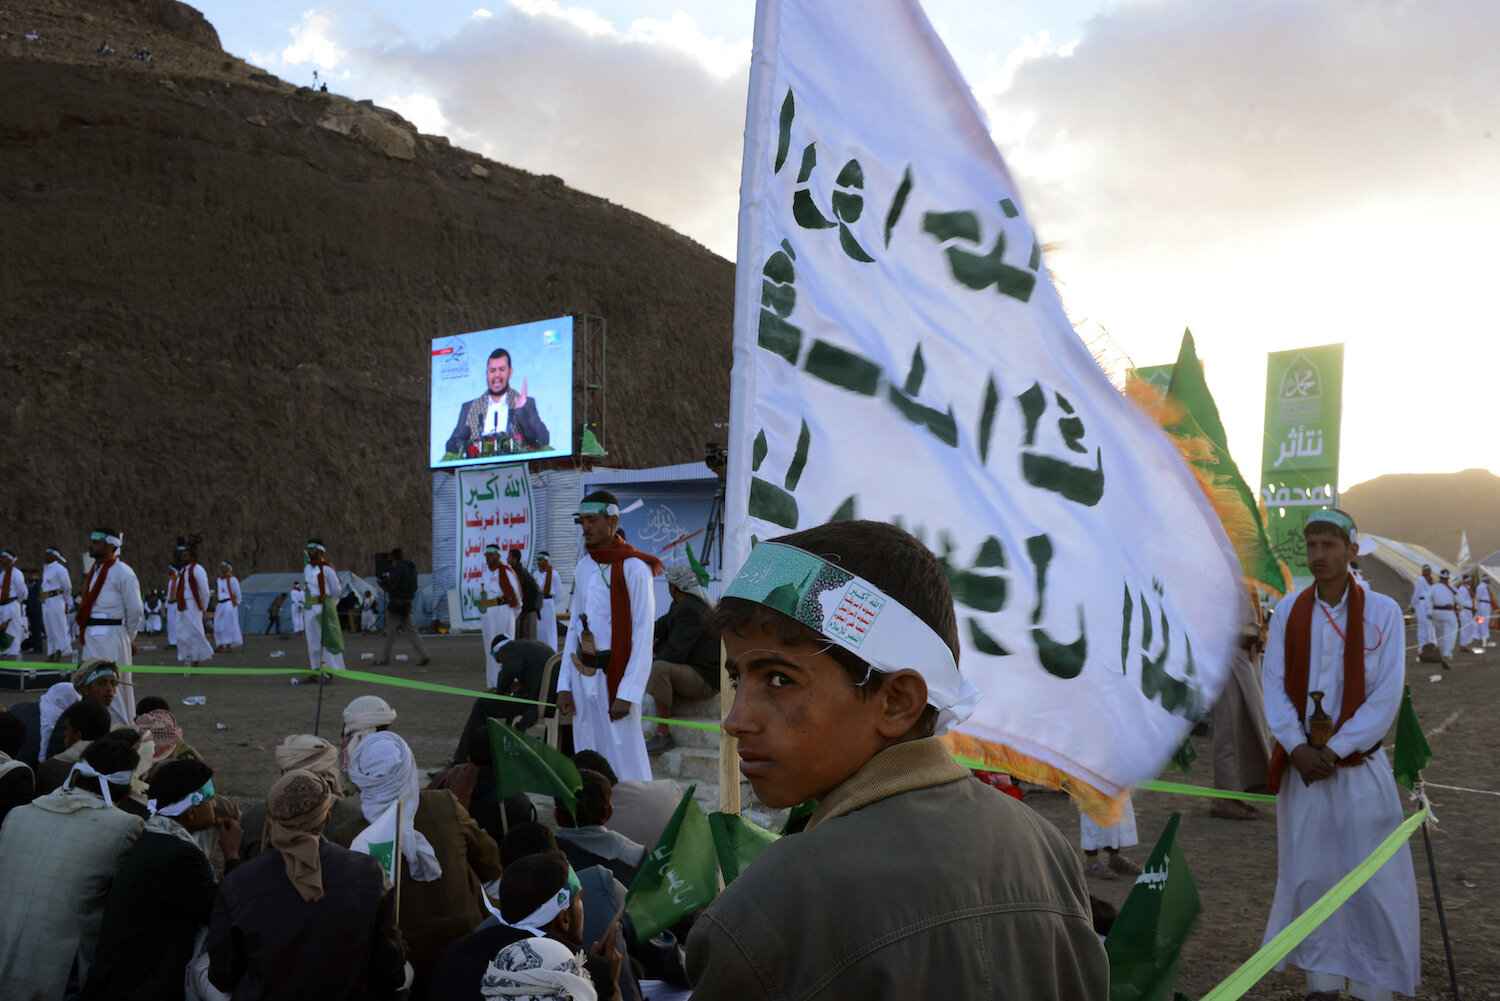  A Yemeni boy raises a flag with a Houthi slogan as the leader, Abdul Malik al Houthi, speaks from a loud screen about their political agenda and the Prophet Mohammad. 